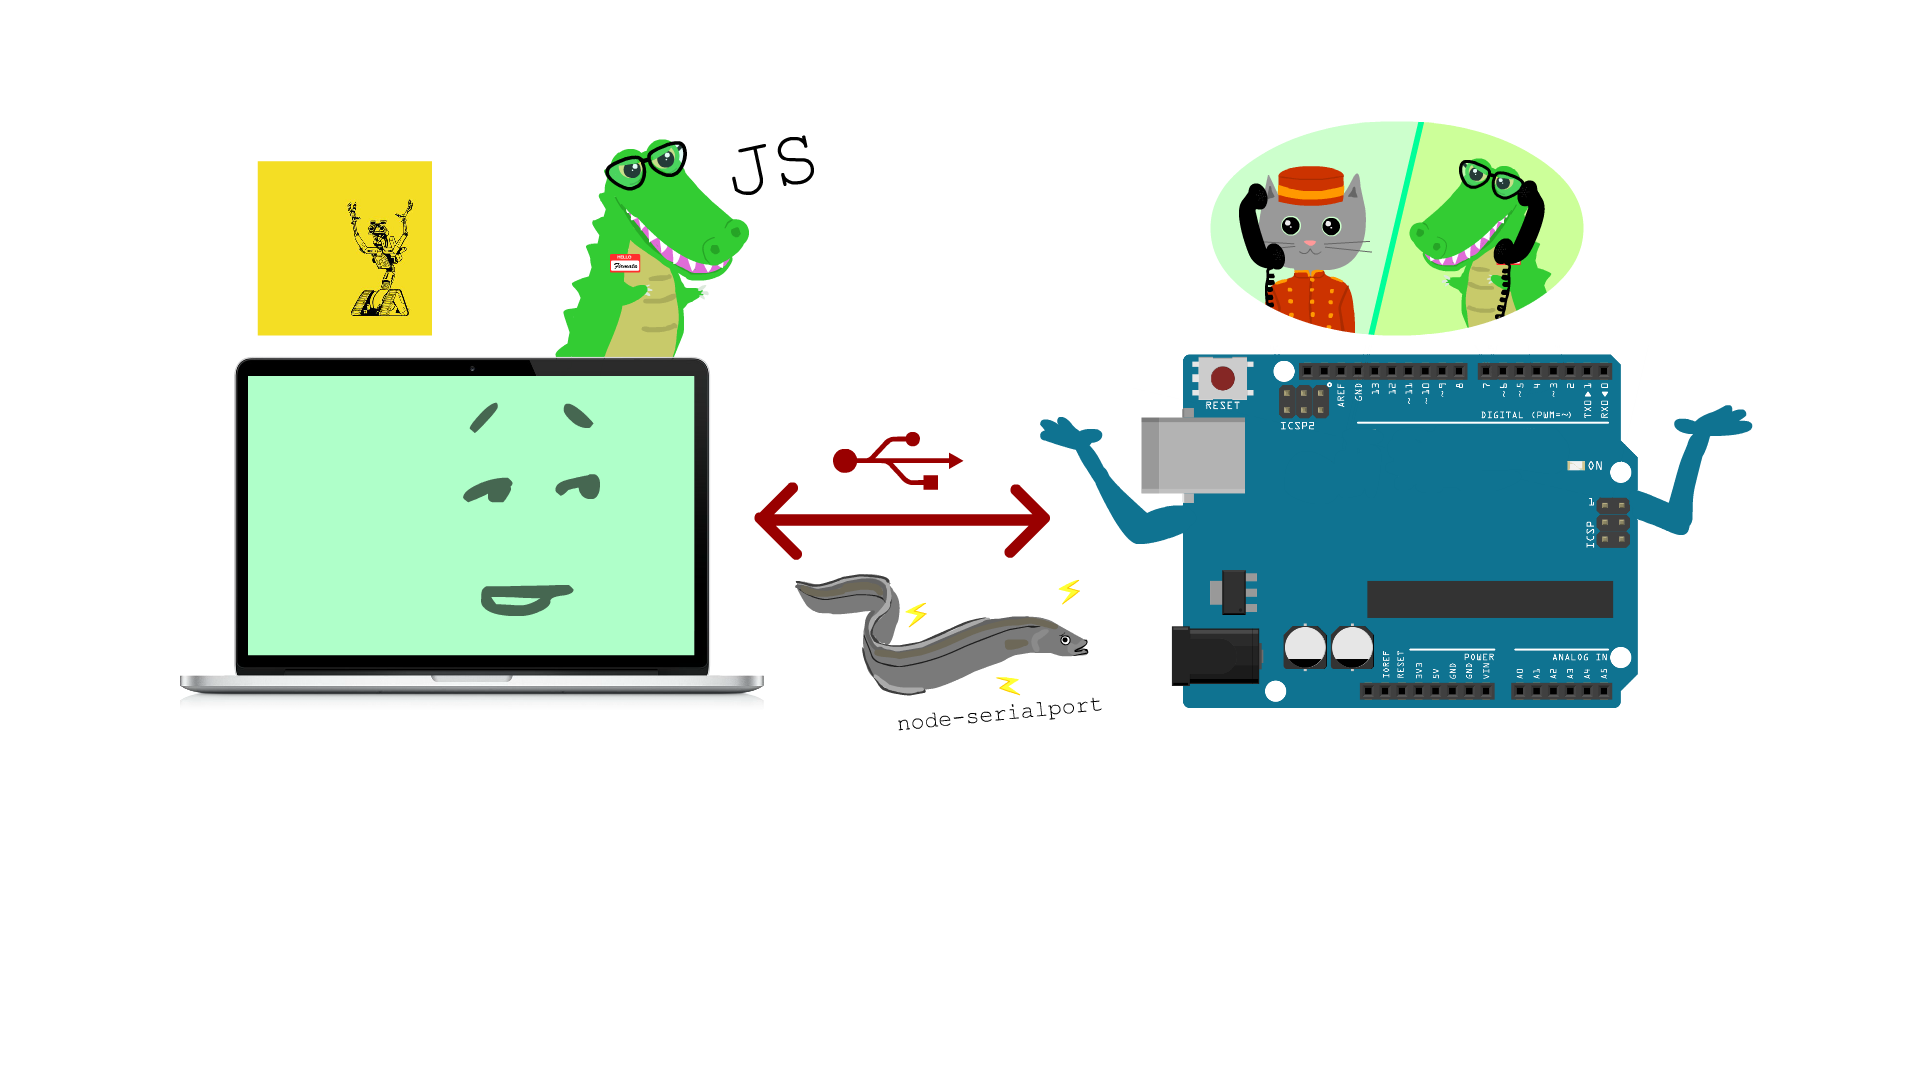 illustration of an Arduino and laptop confused about how to speak to one another. The laptop has an awkward facial expression, and the Arduino is throwing its arms up in a confused manner. The phone call between the crocodile and the cat previously is illustrated above the arduino. An indentical crocodile is posed above the laptop now wth the letters 'JS' next to her. An eletric eel now appears between the arduino and the laptop.